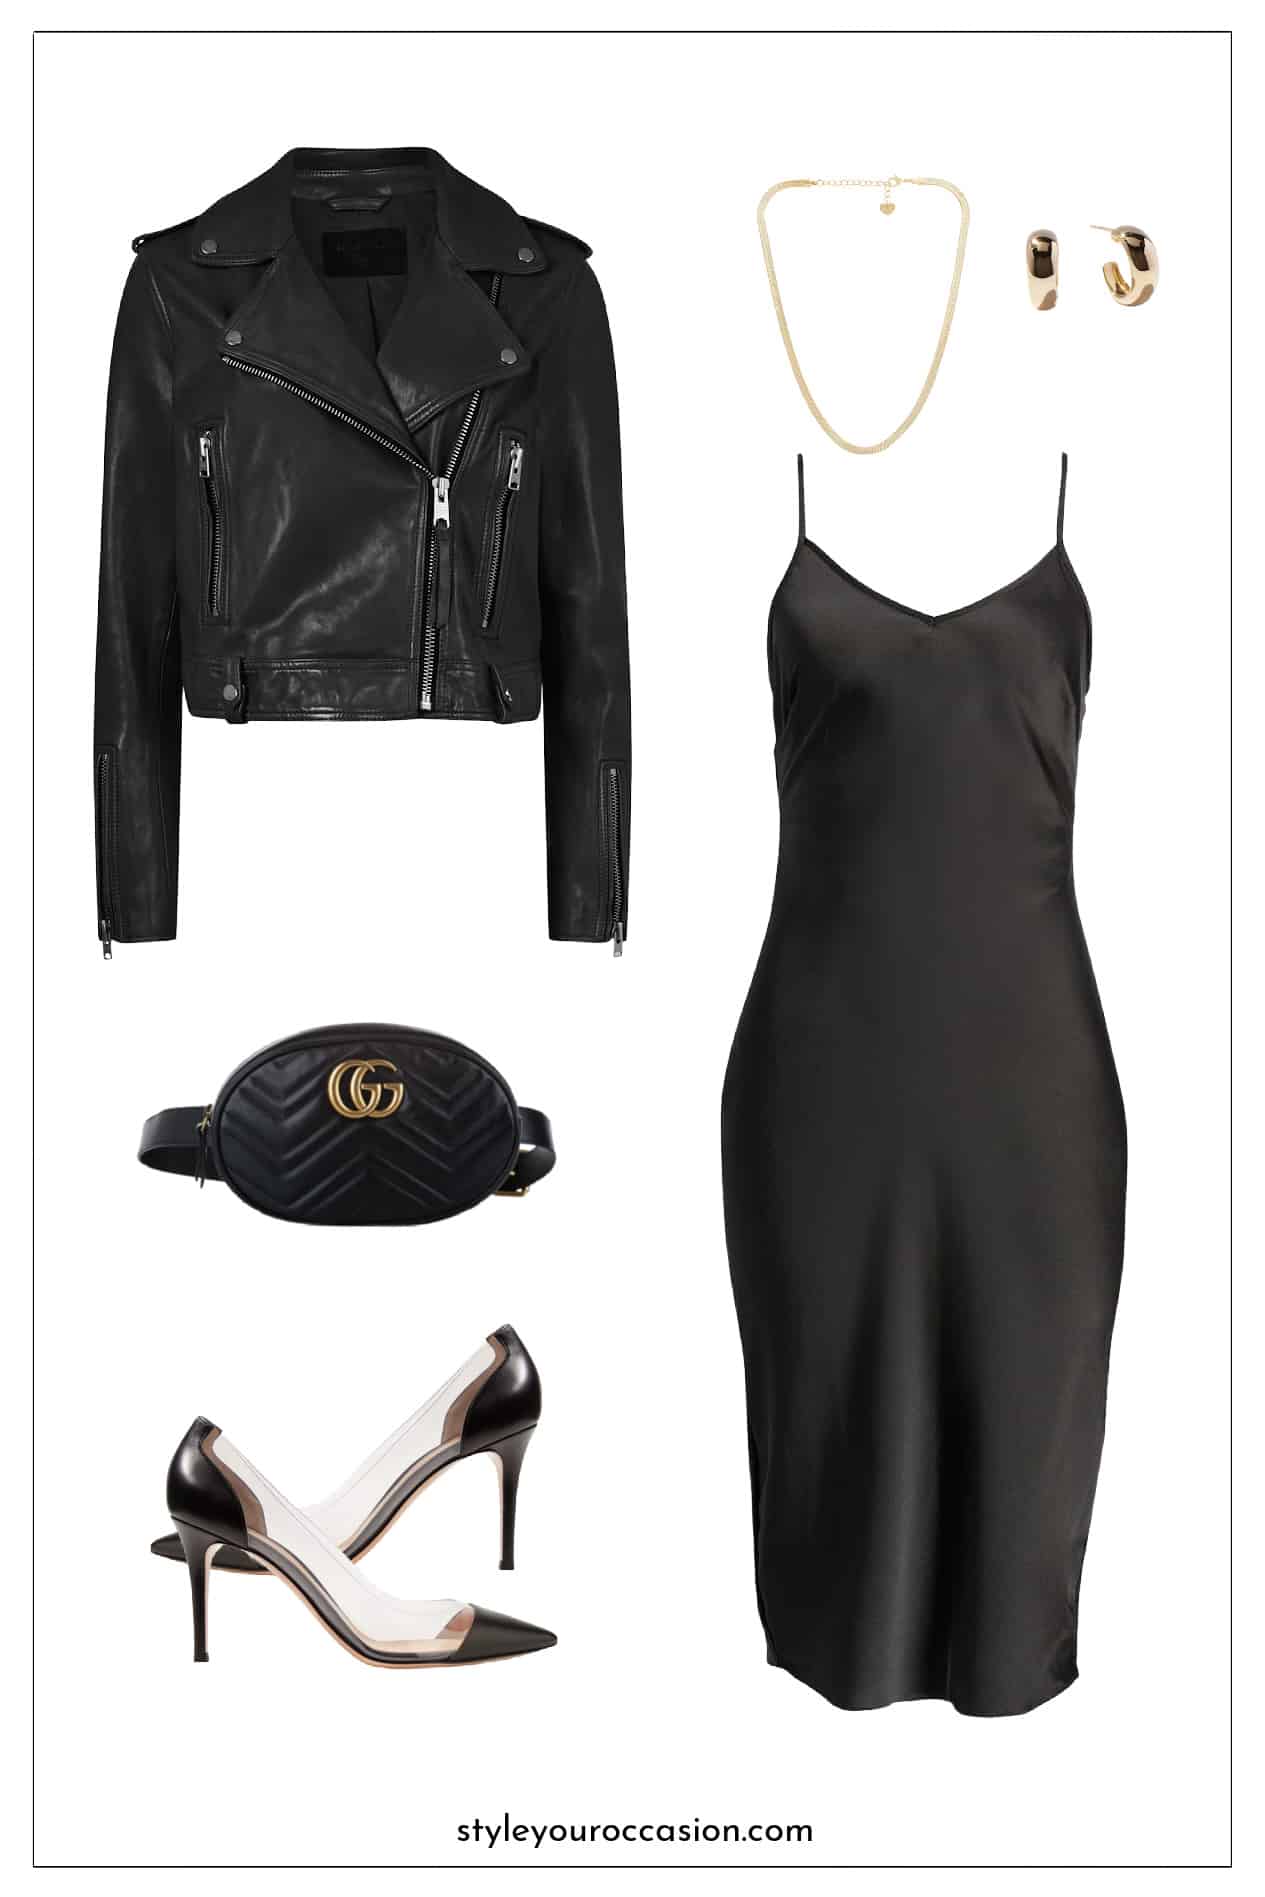 image of an outfit mood board with a black slip dress, black and pvc clear pumps, black Gucci belt bag, and a black leather jacket with gold jewelry